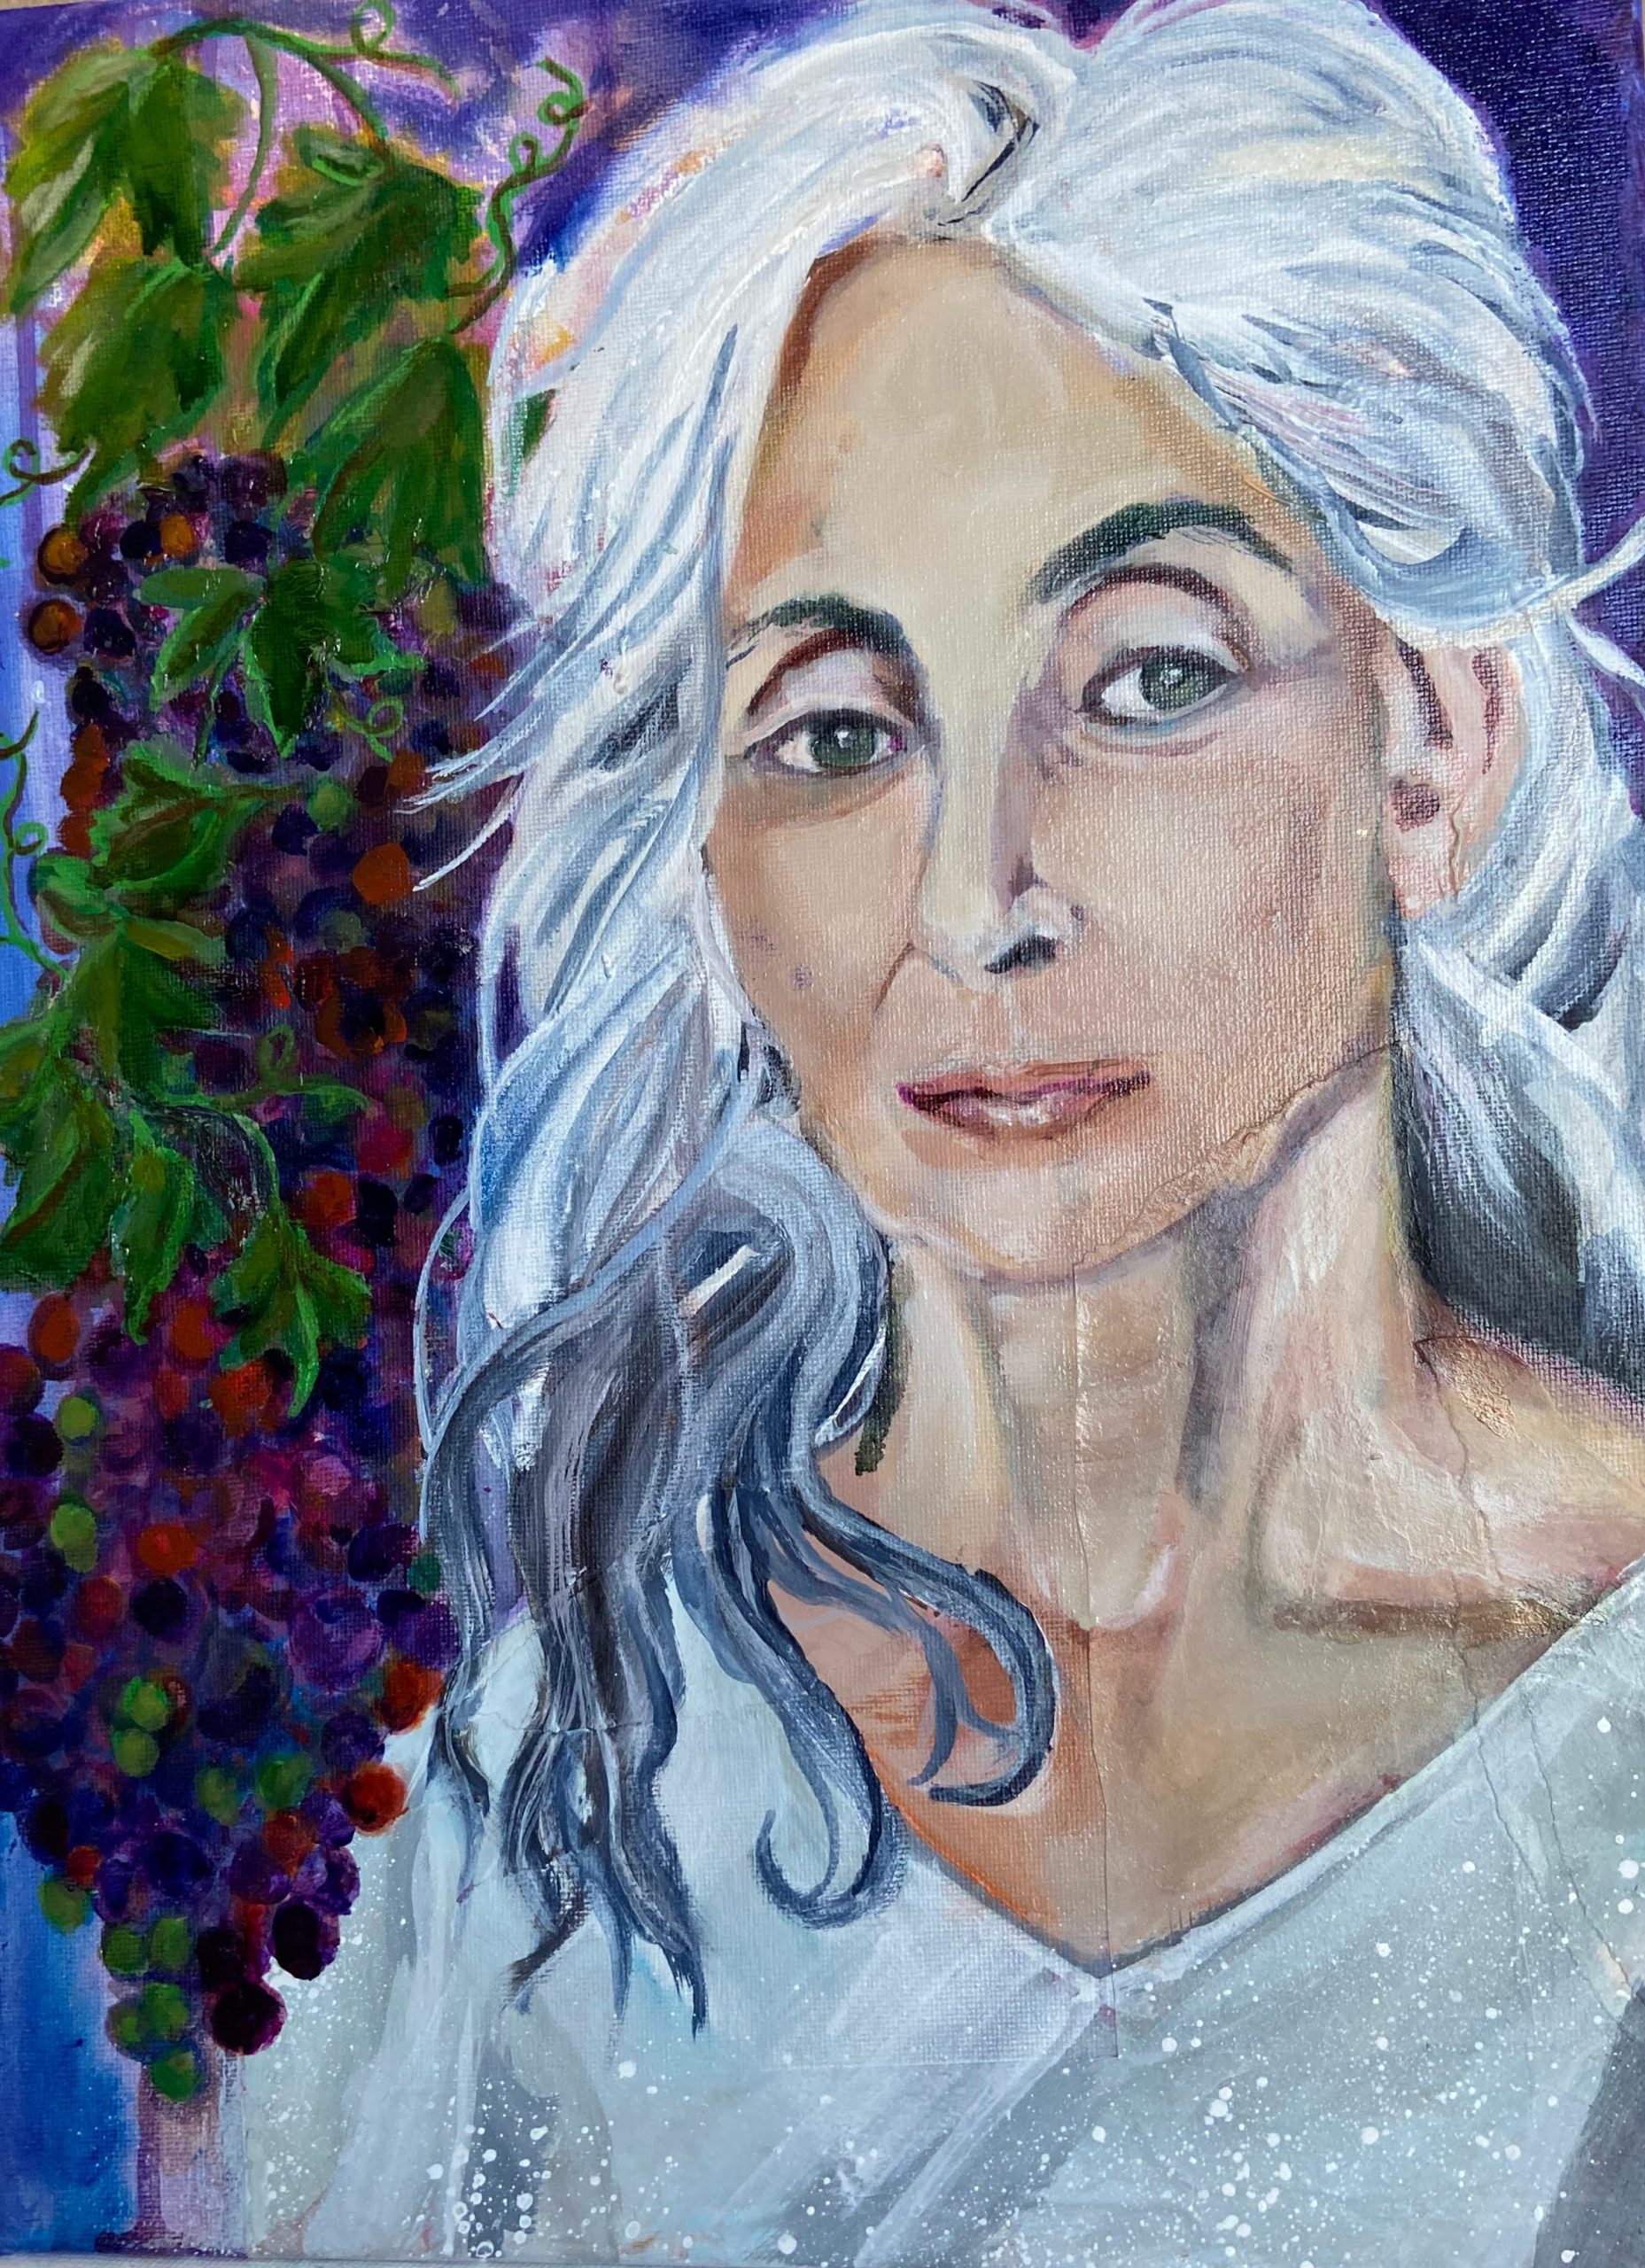 Final portrait of a mature woman with grapes